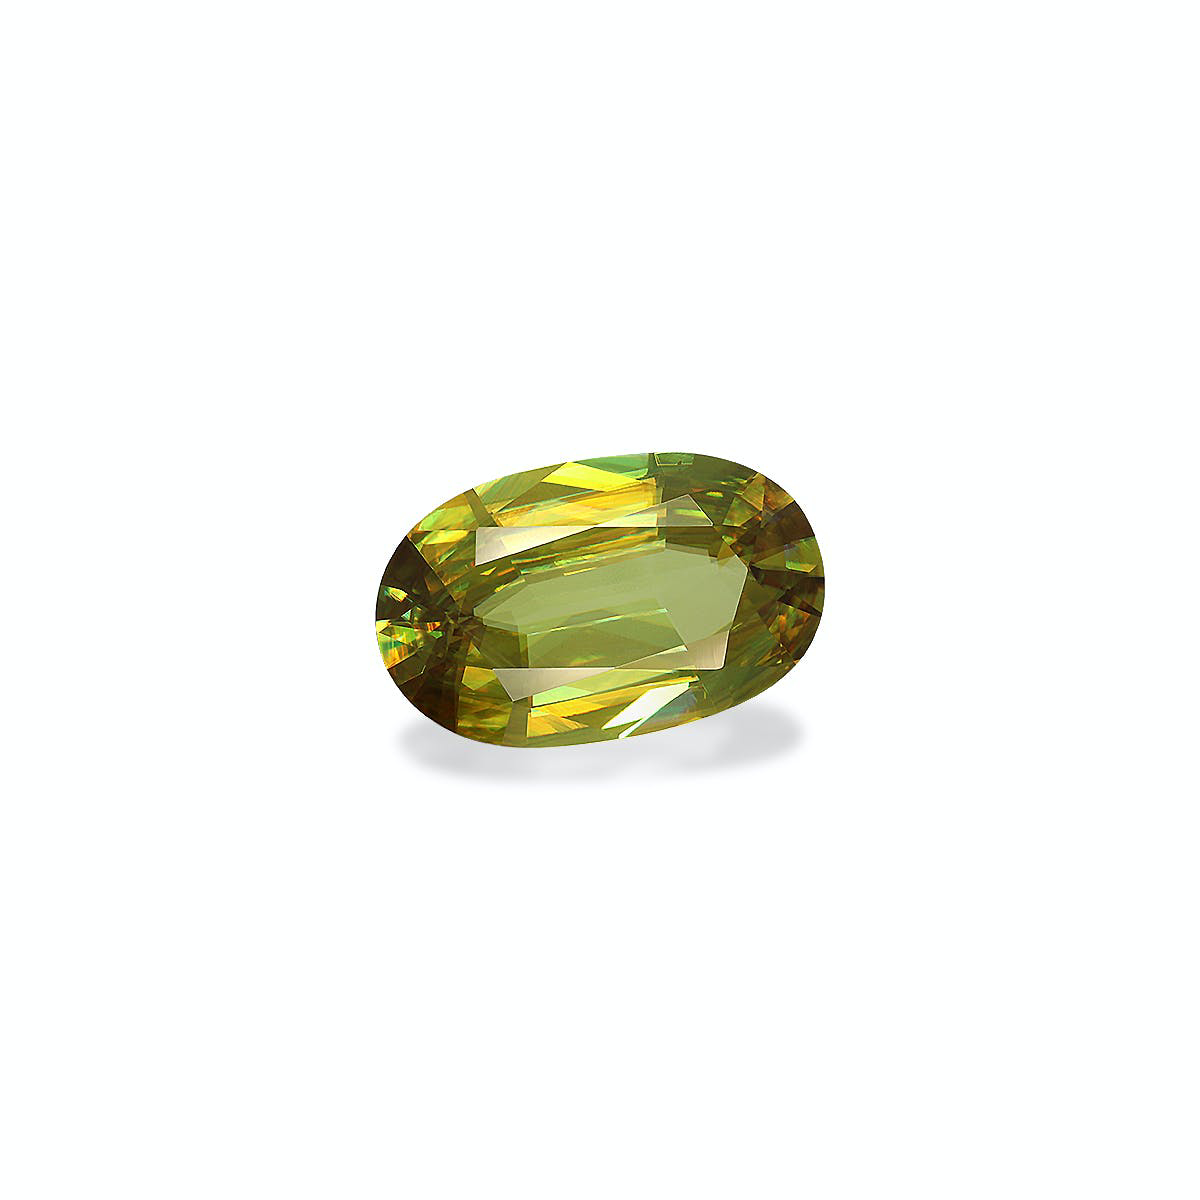 Picture of Lime Green Sphene 6.49ct (SH1072)